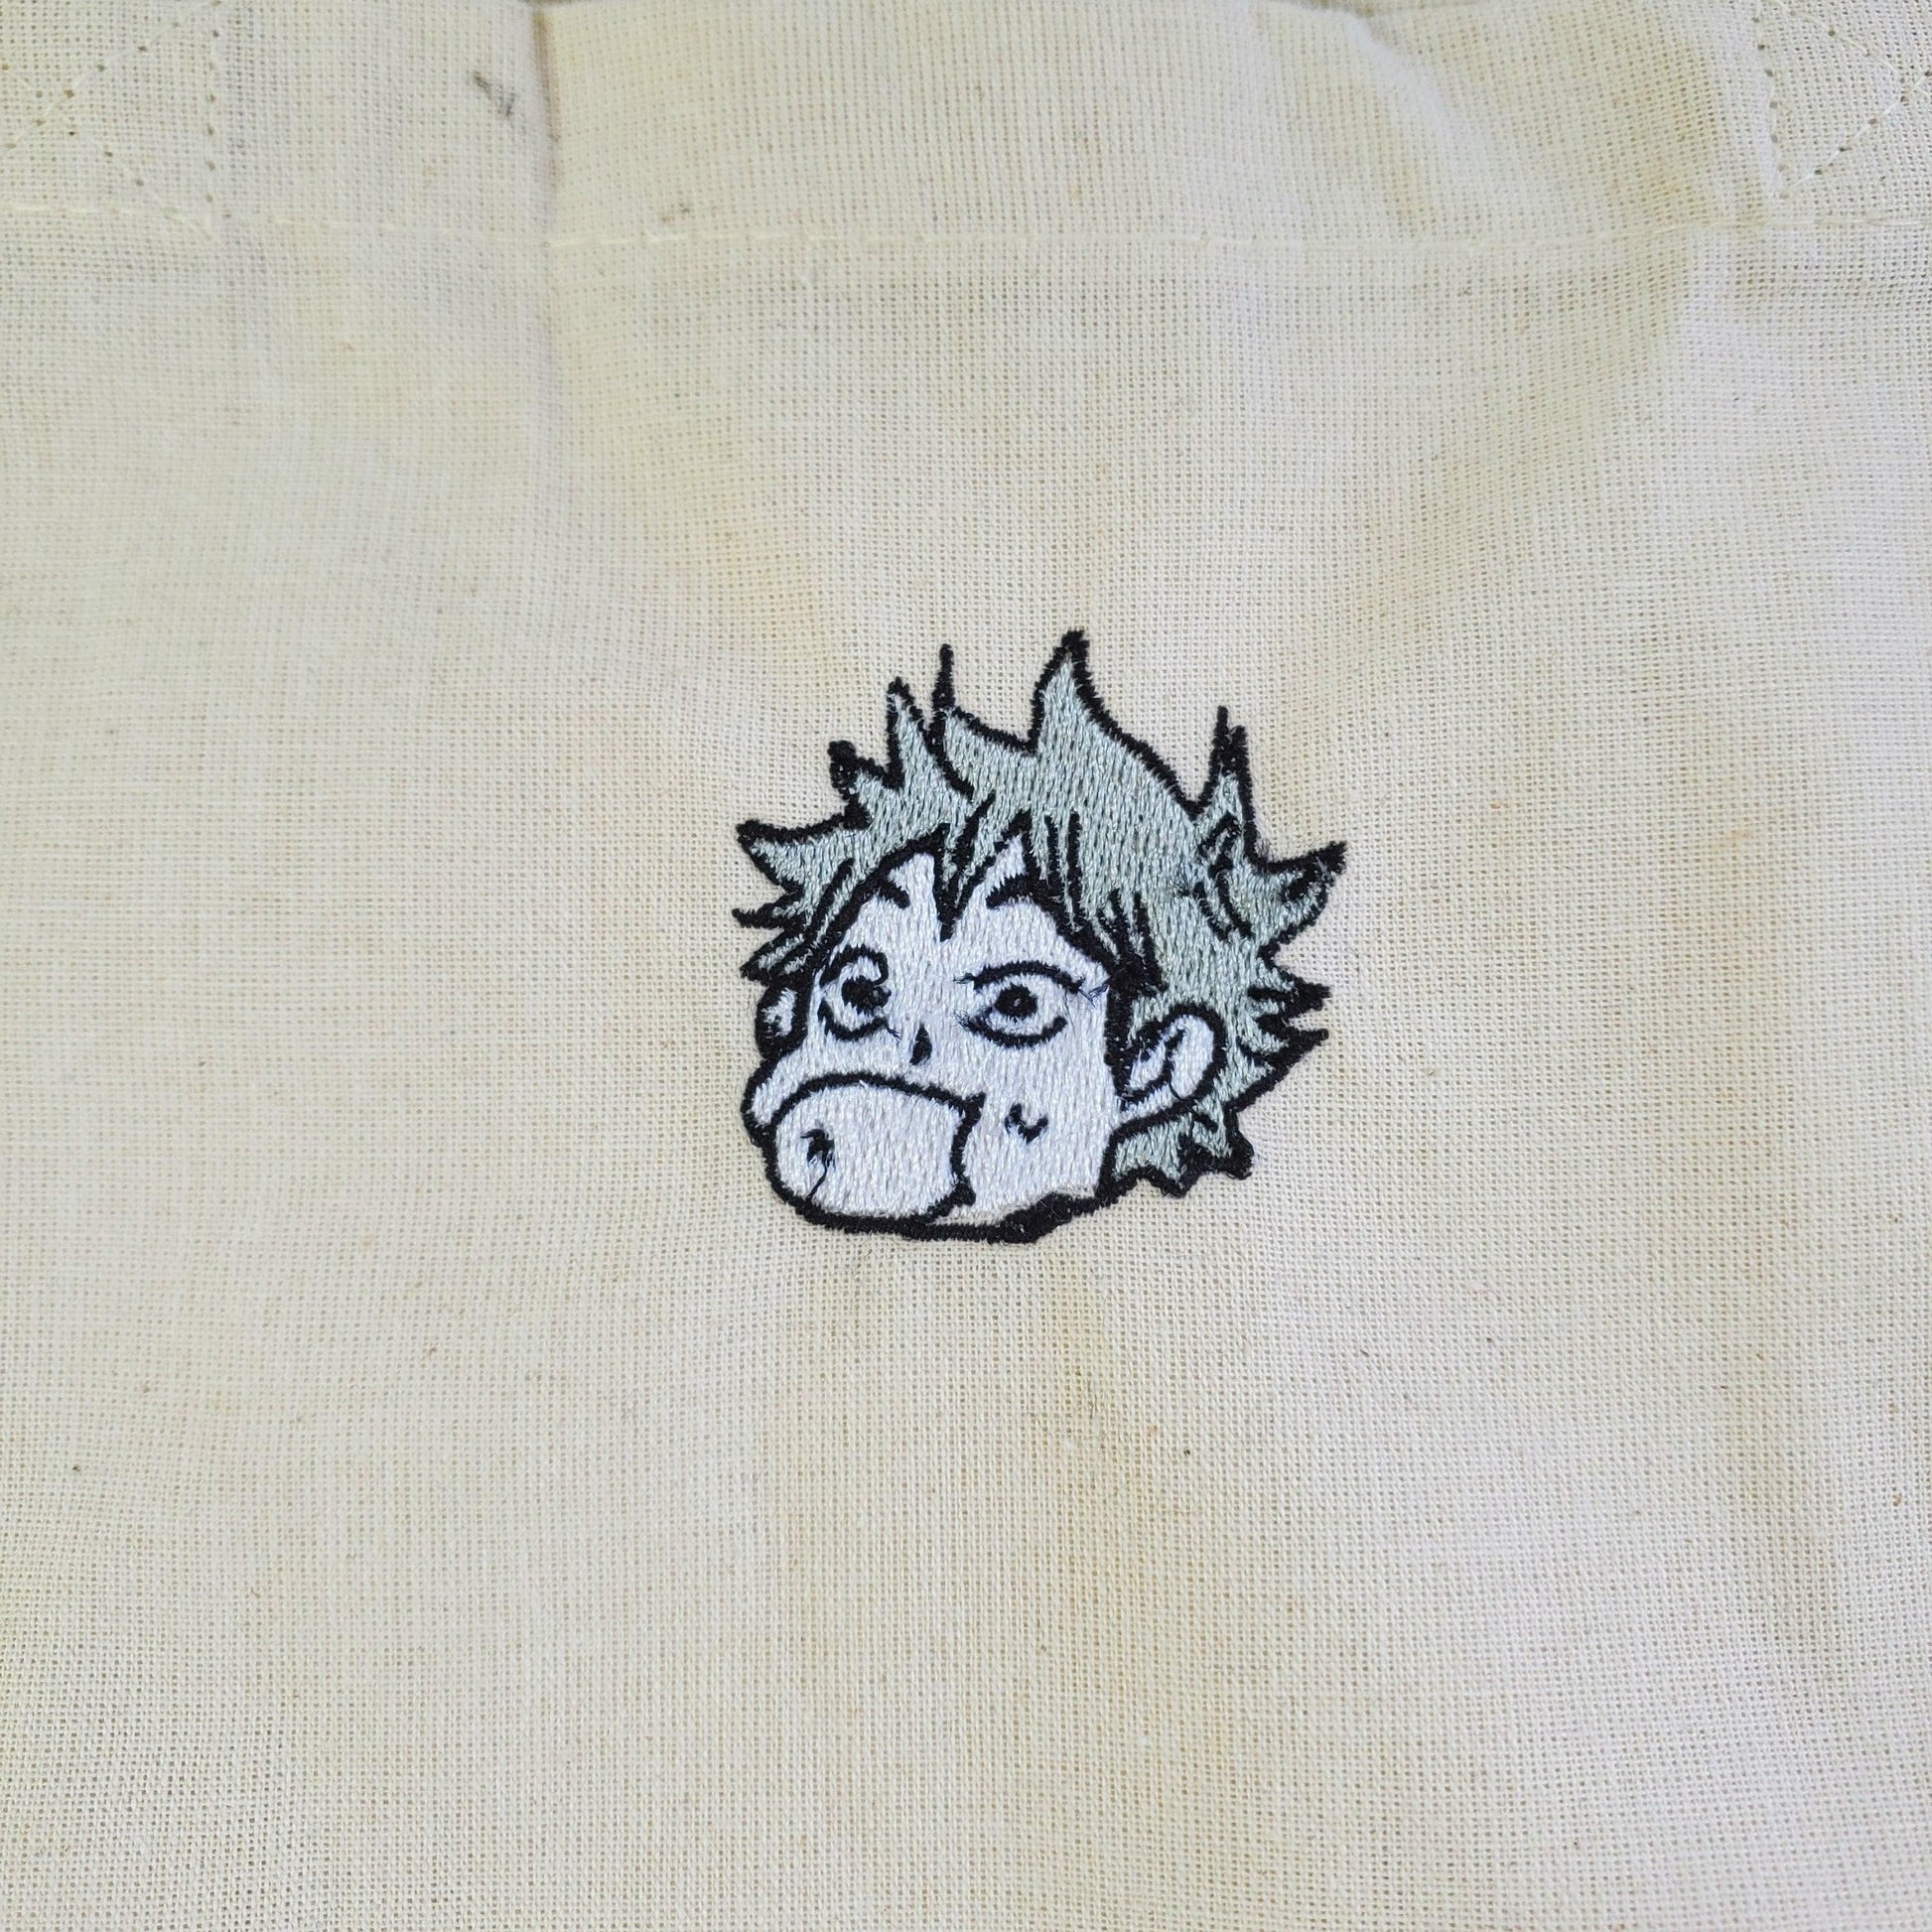 Haikyuu Character Heads Embroidery Totes Bags - Moko's Boutique